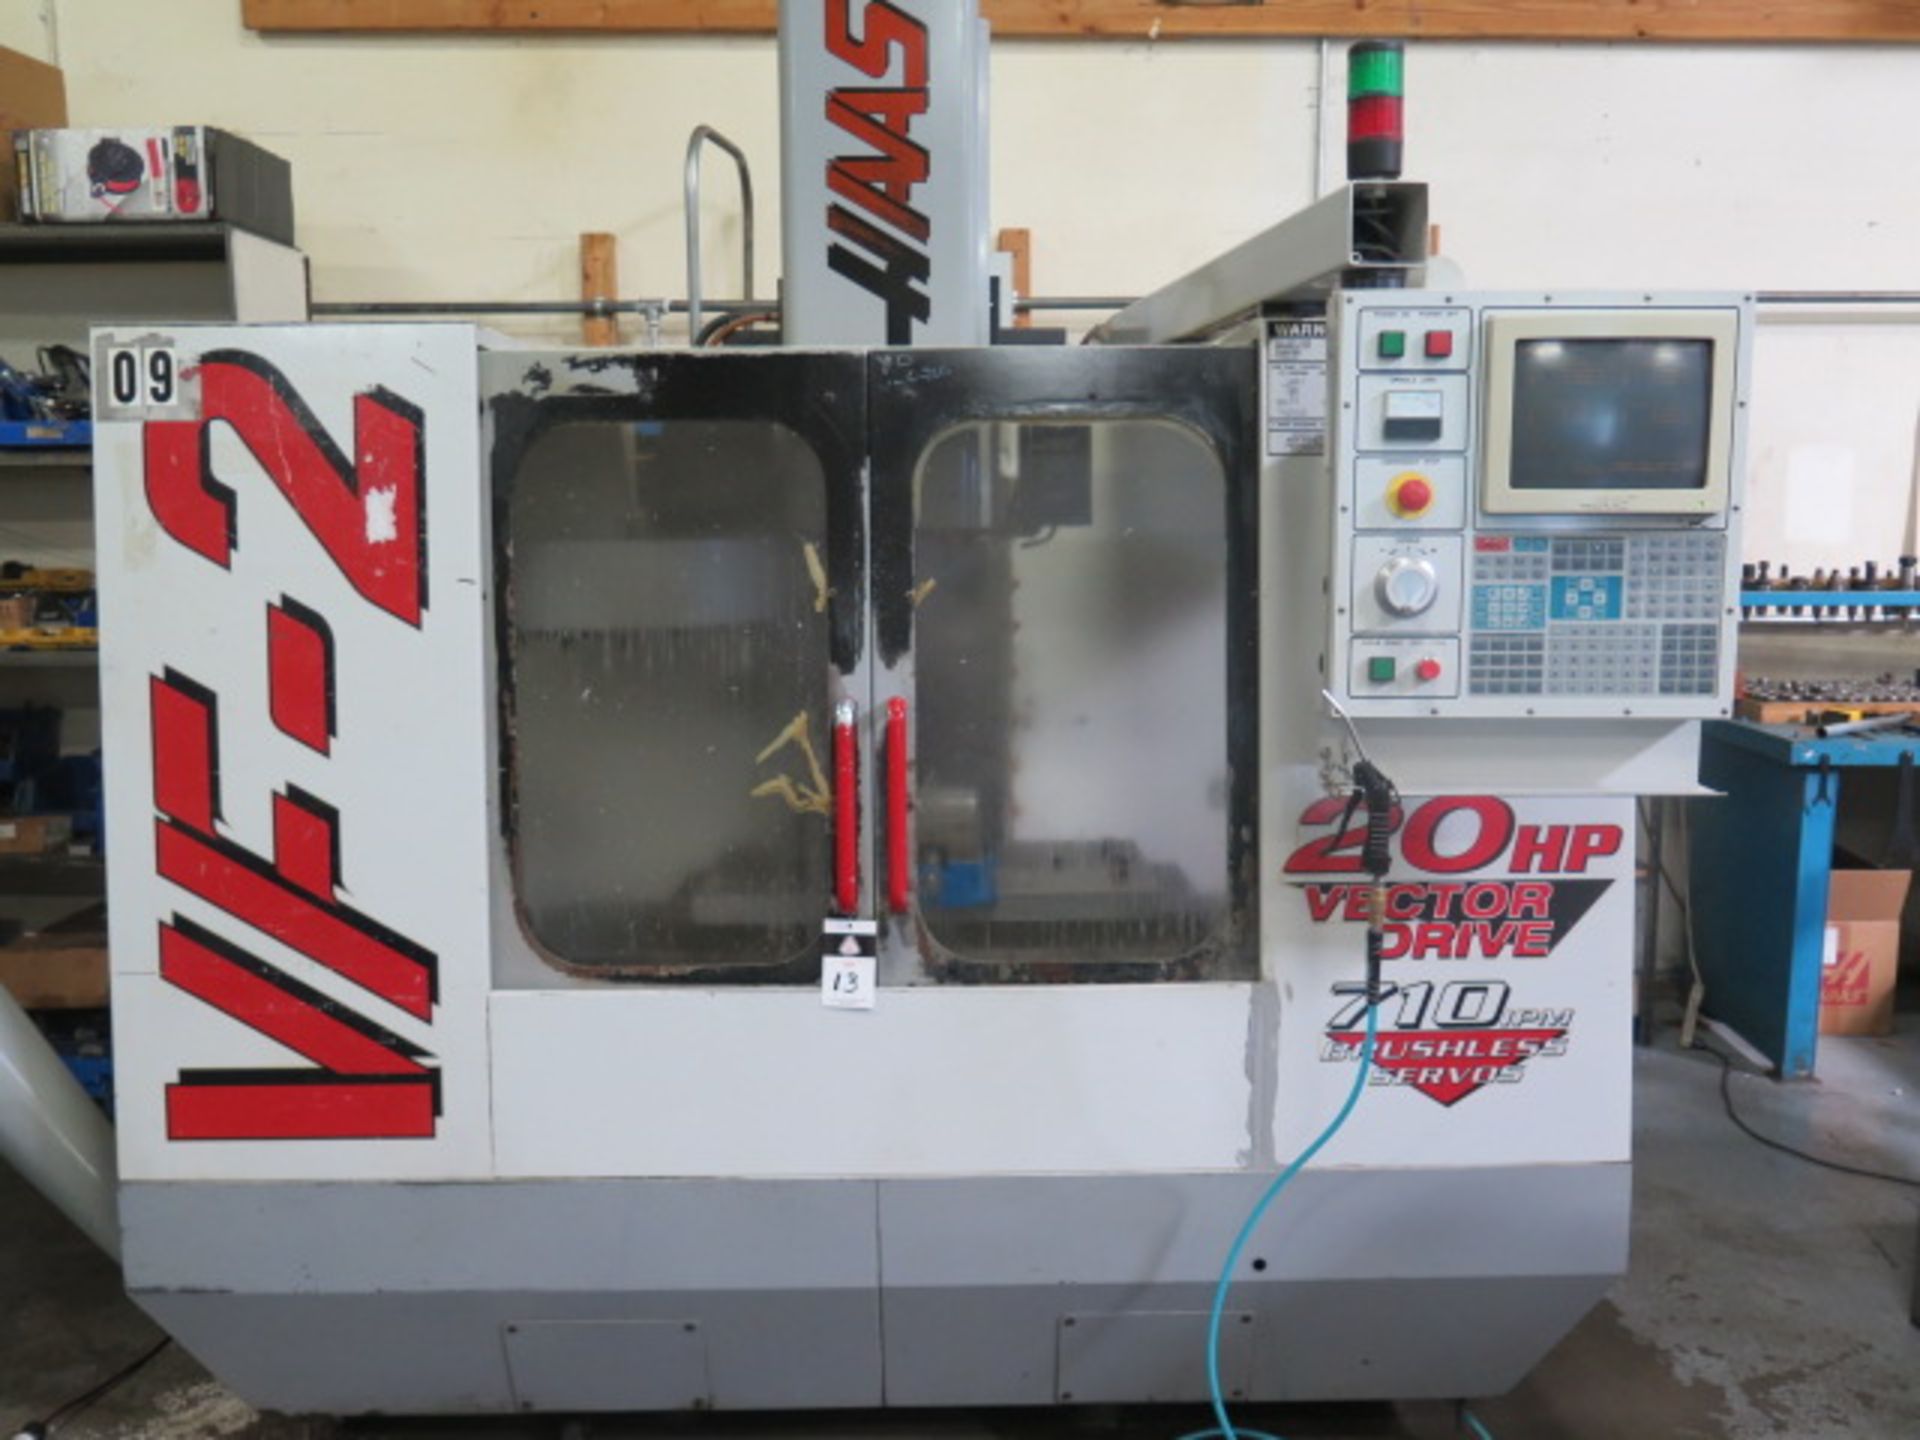 1998 Haas VF-2 CNC Vertical Machining Center s/n 14466 w/ Haas Controls, 20-Station ATC, SOLD AS IS